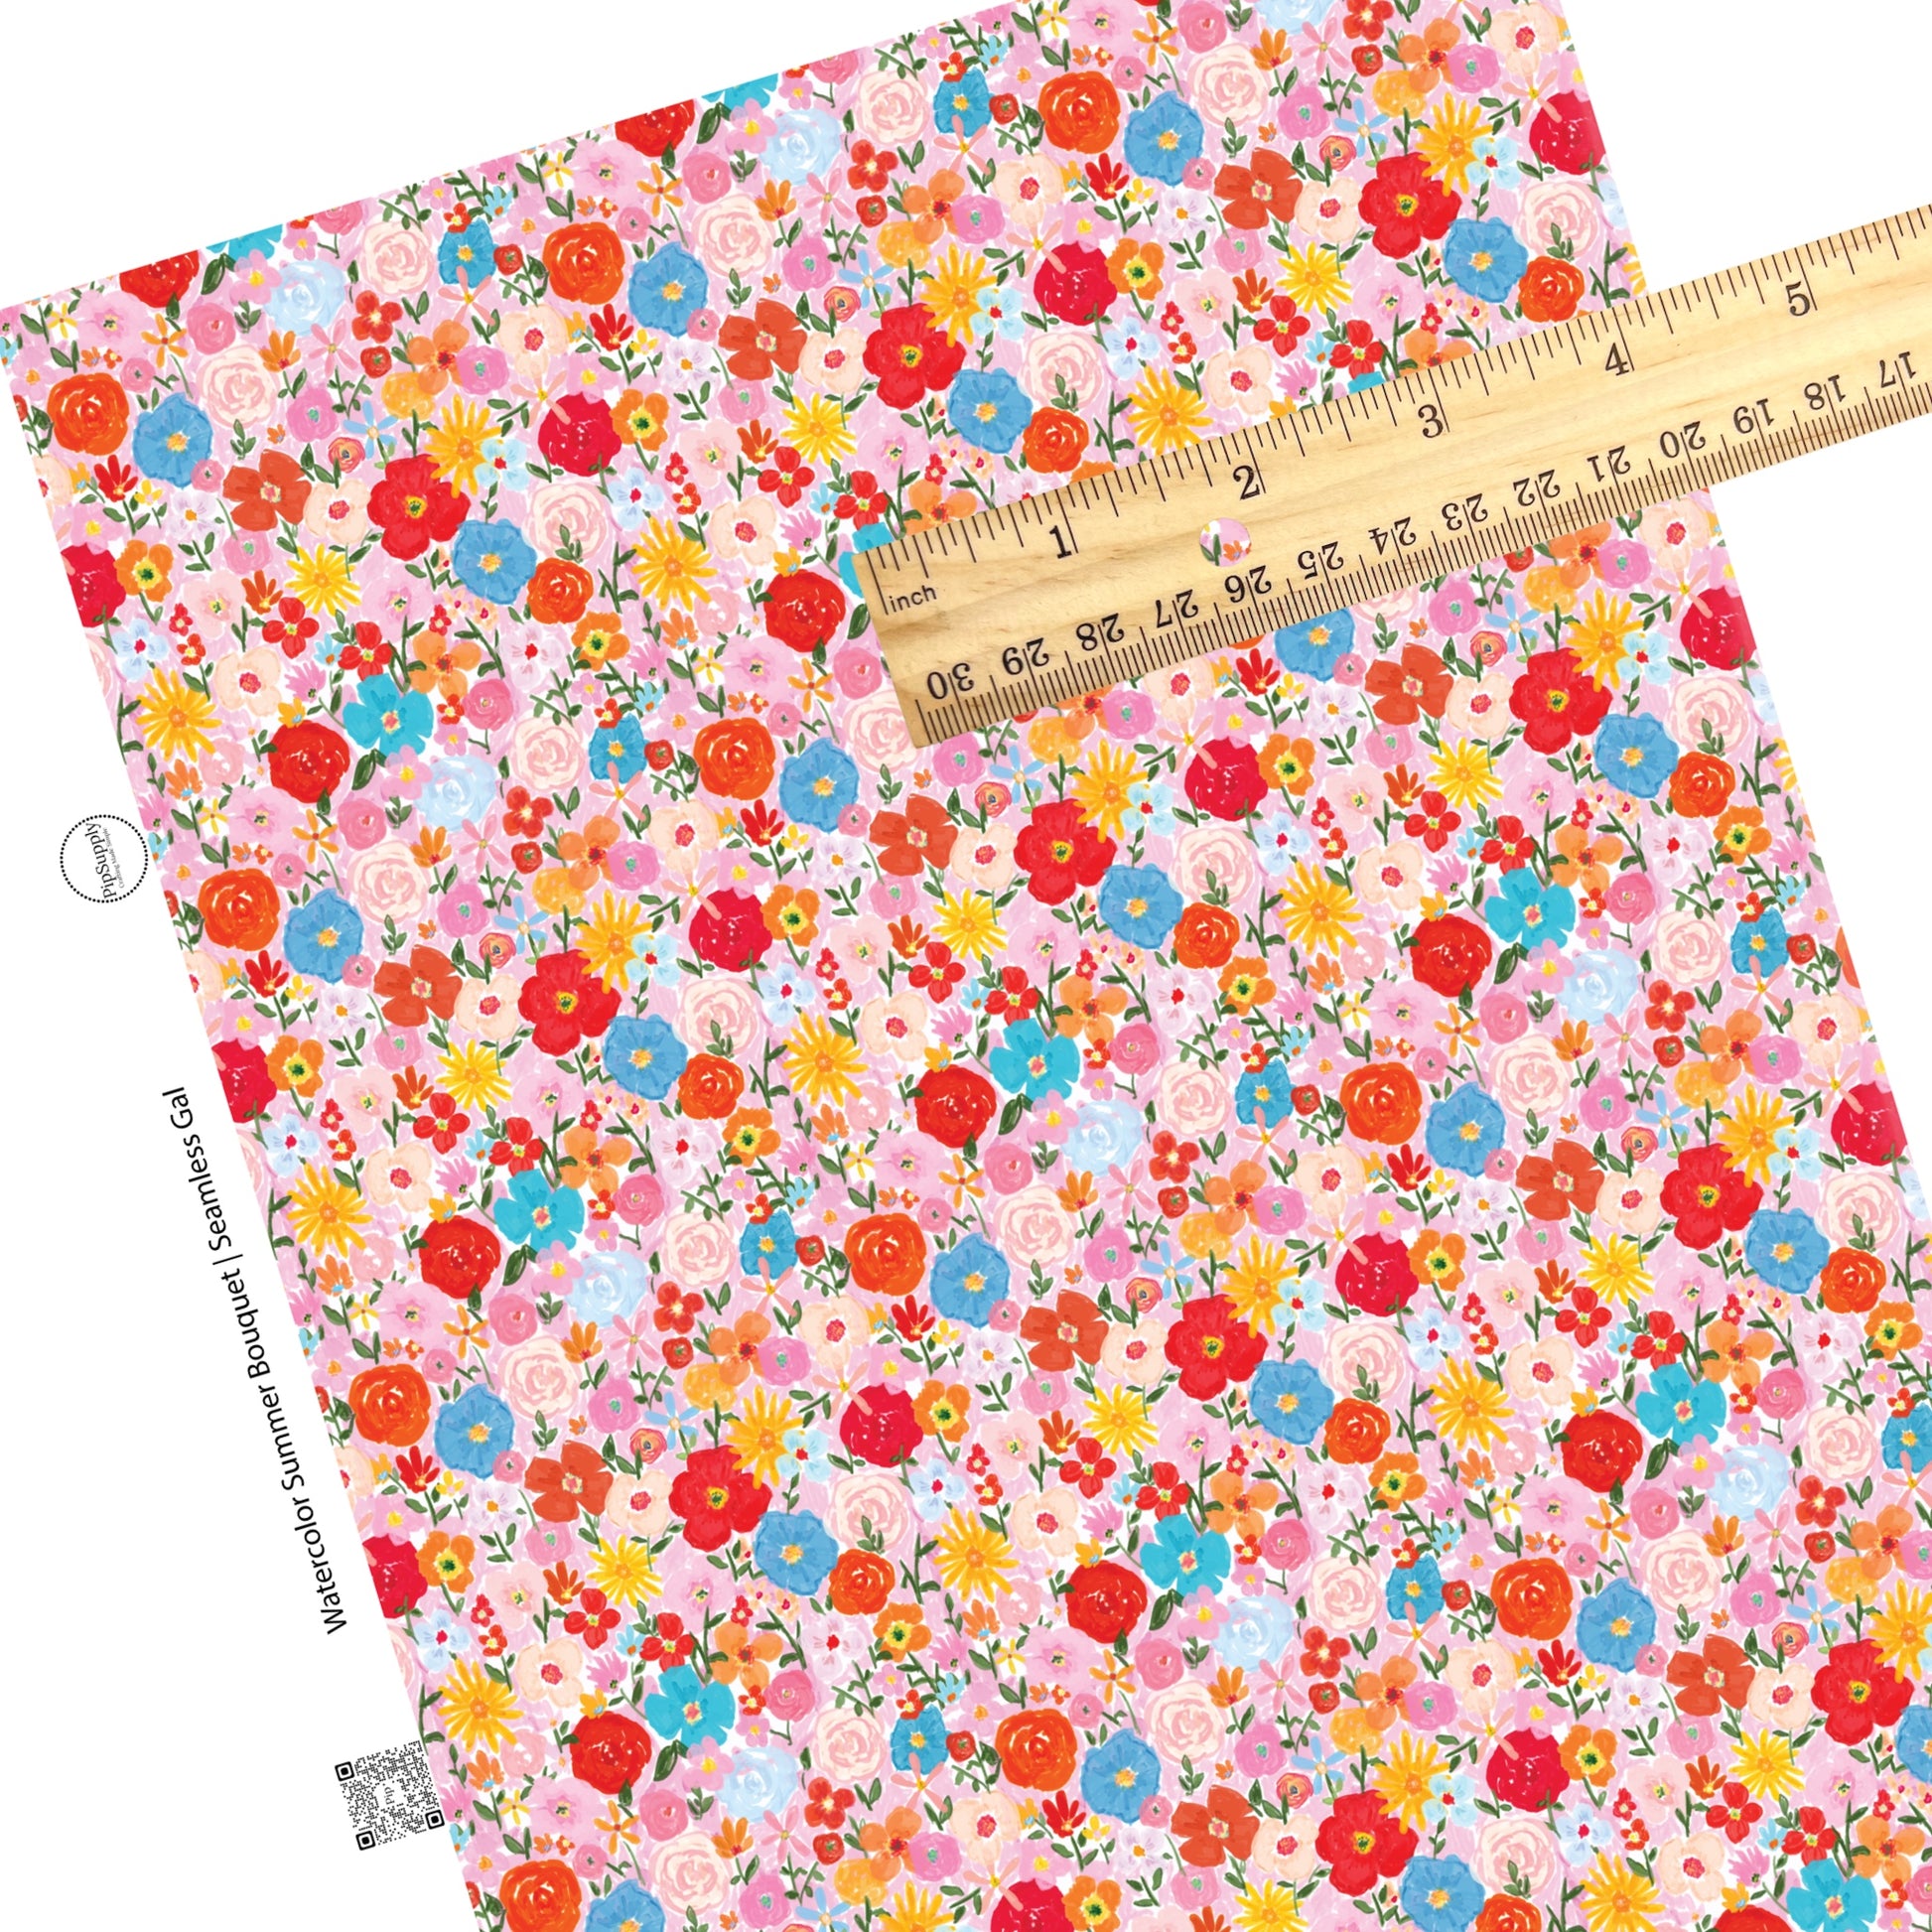 These floral faux leather sheets contain the following design elements: watercolor flowers on pink. Our CPSIA compliant faux leather sheets or rolls can be used for all types of crafting projects.